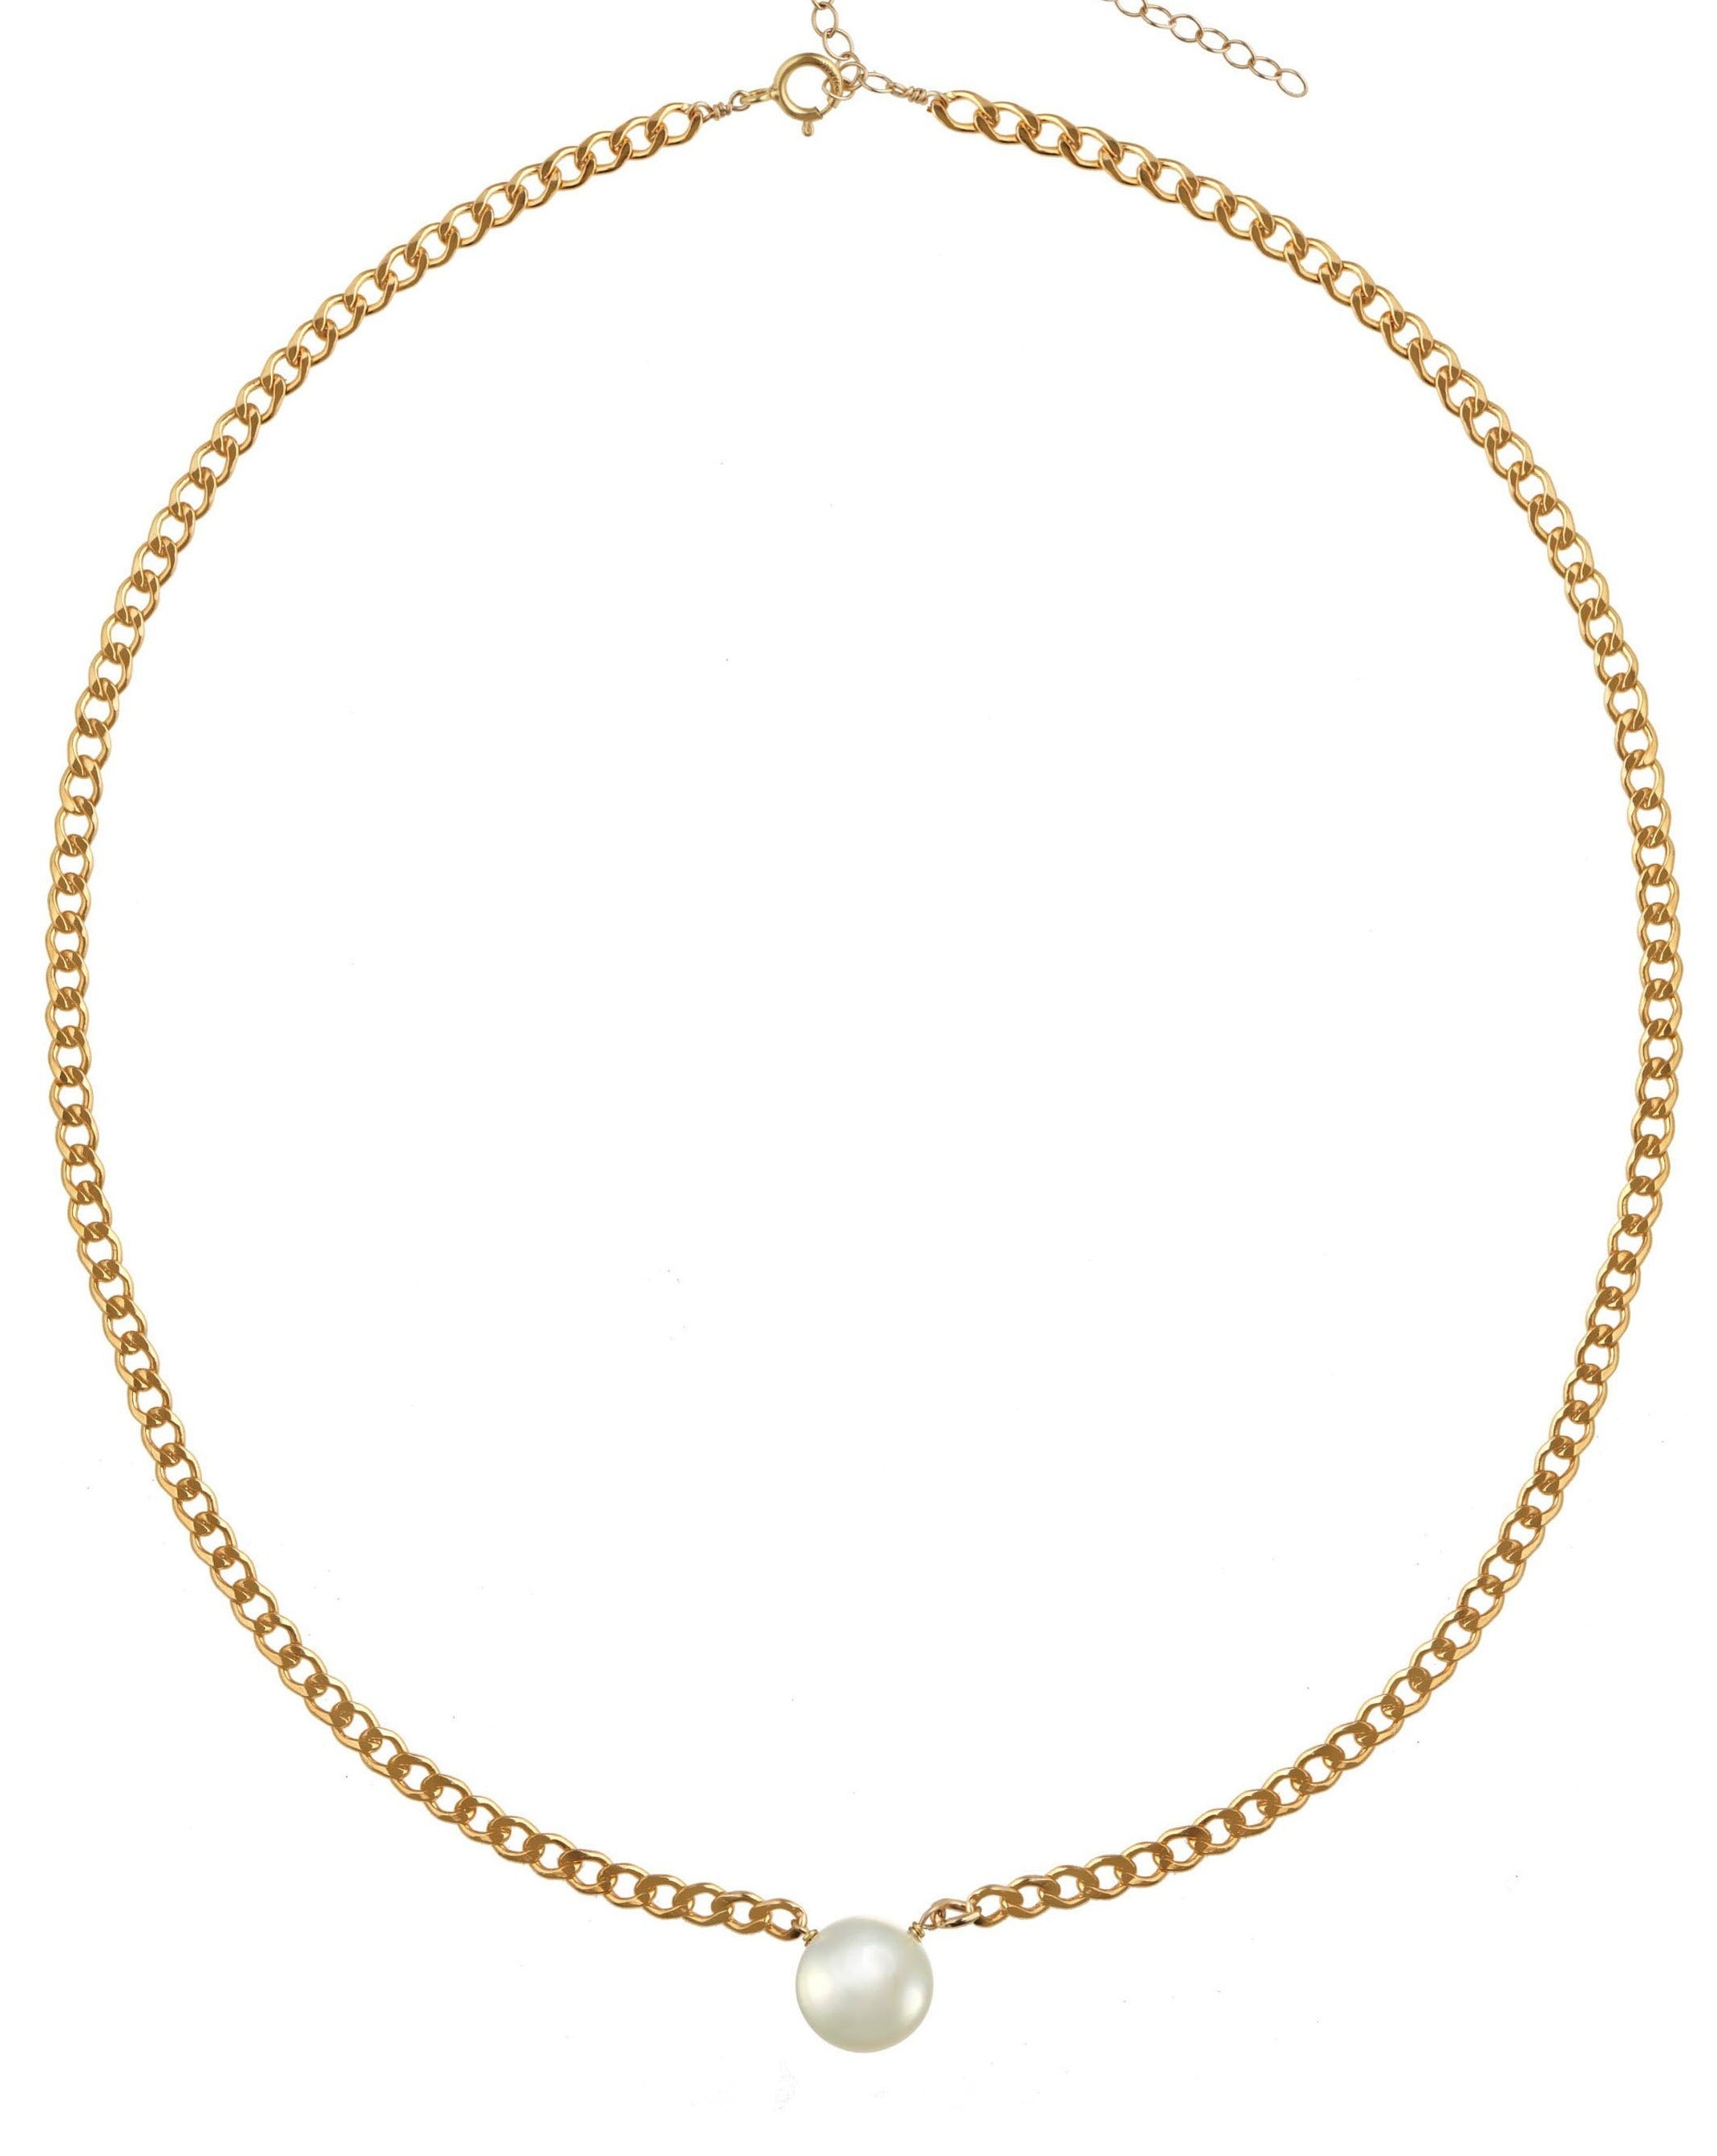 Harper Necklace by KOZAKH. A 16 to 18 inch adjustable length braided chain necklace in 14K Gold Filled, featuring a flat backed Freshwater Pearl.